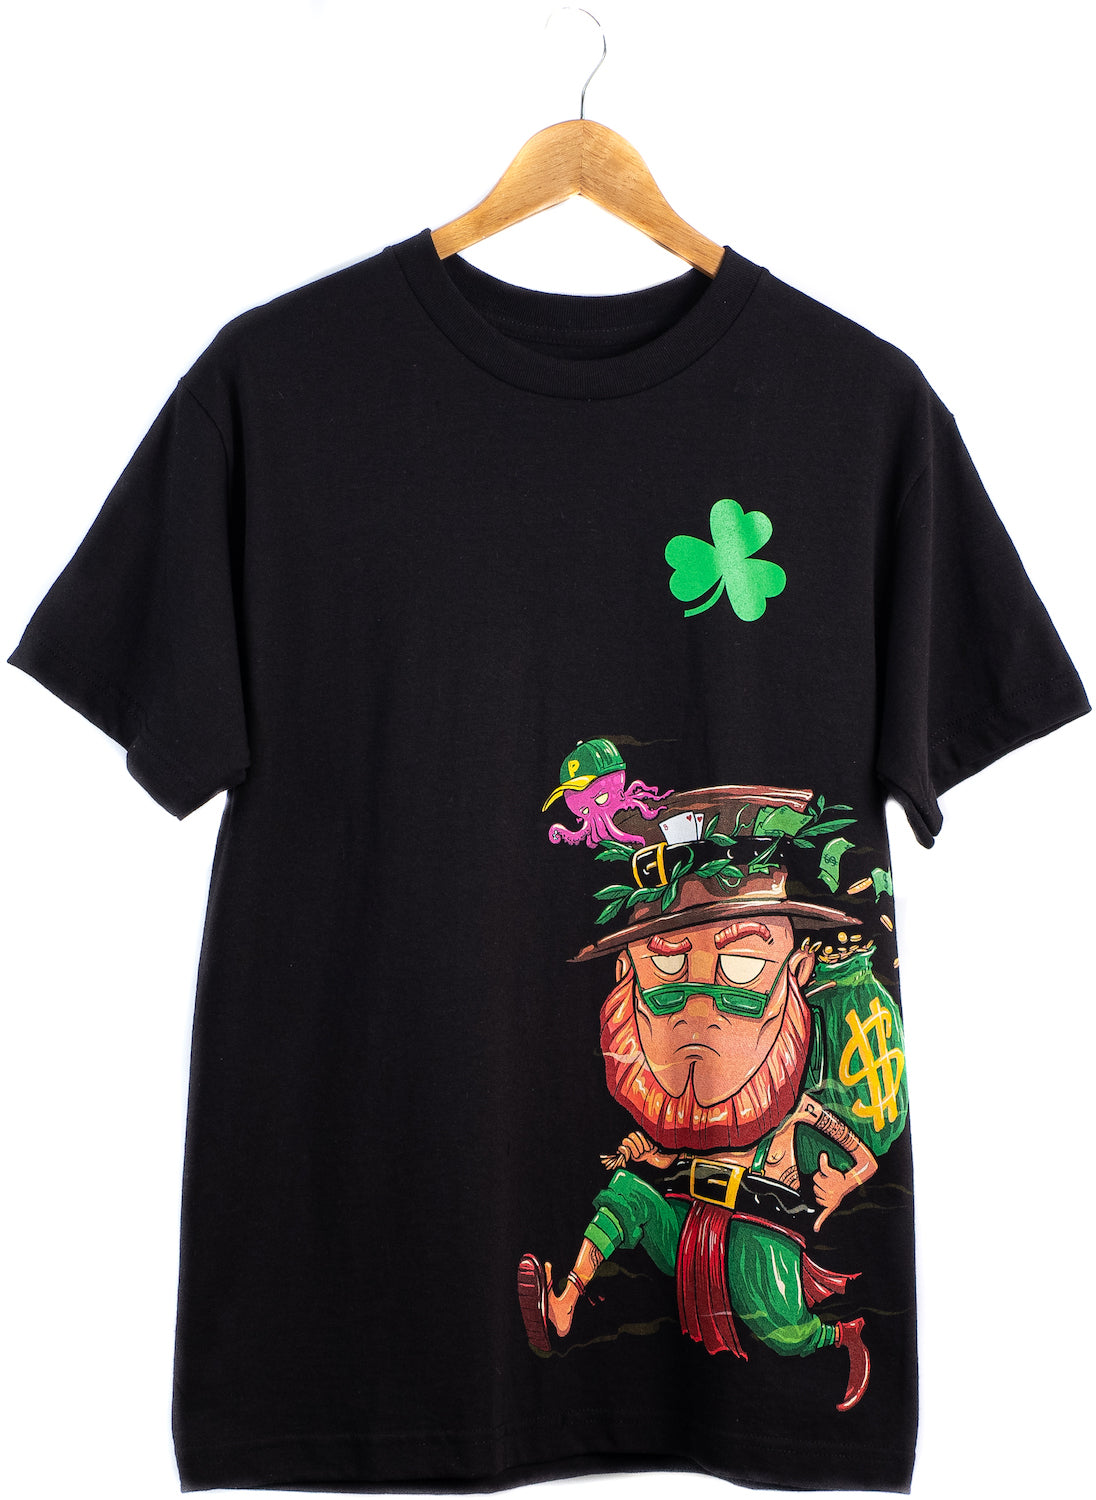 "Paddy" design t-shirt, front